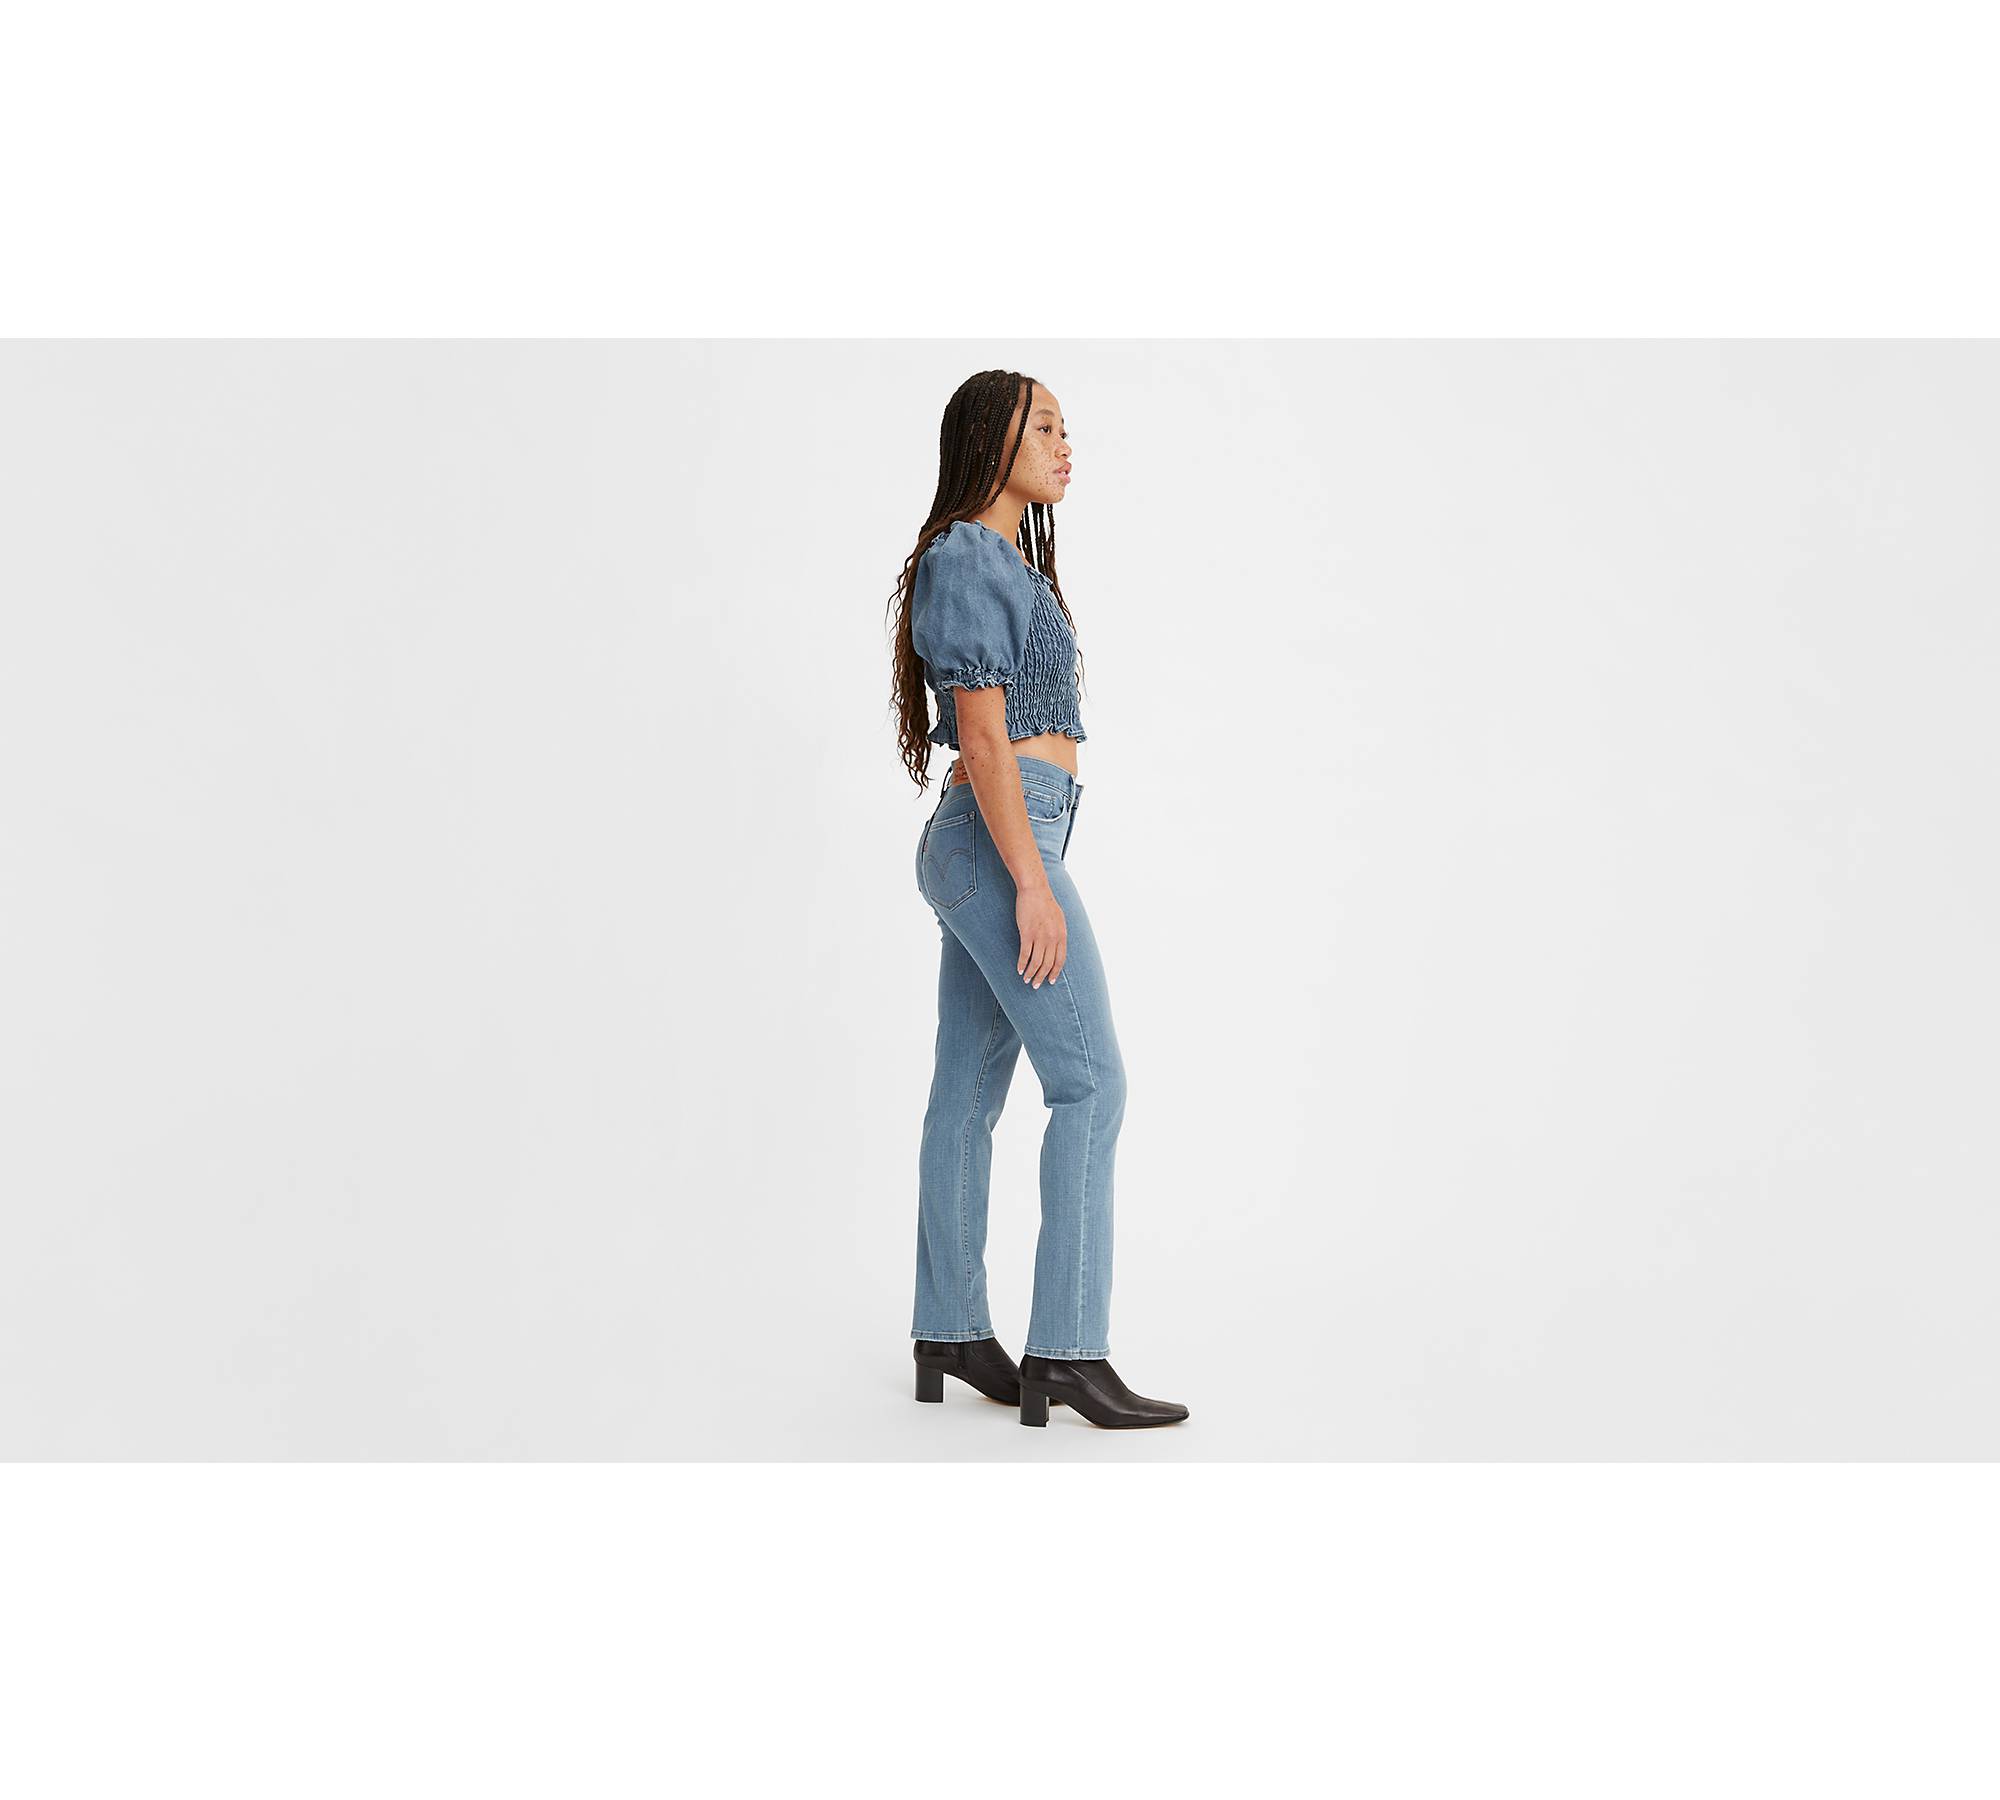 Jeans Levis Mujer Clasico